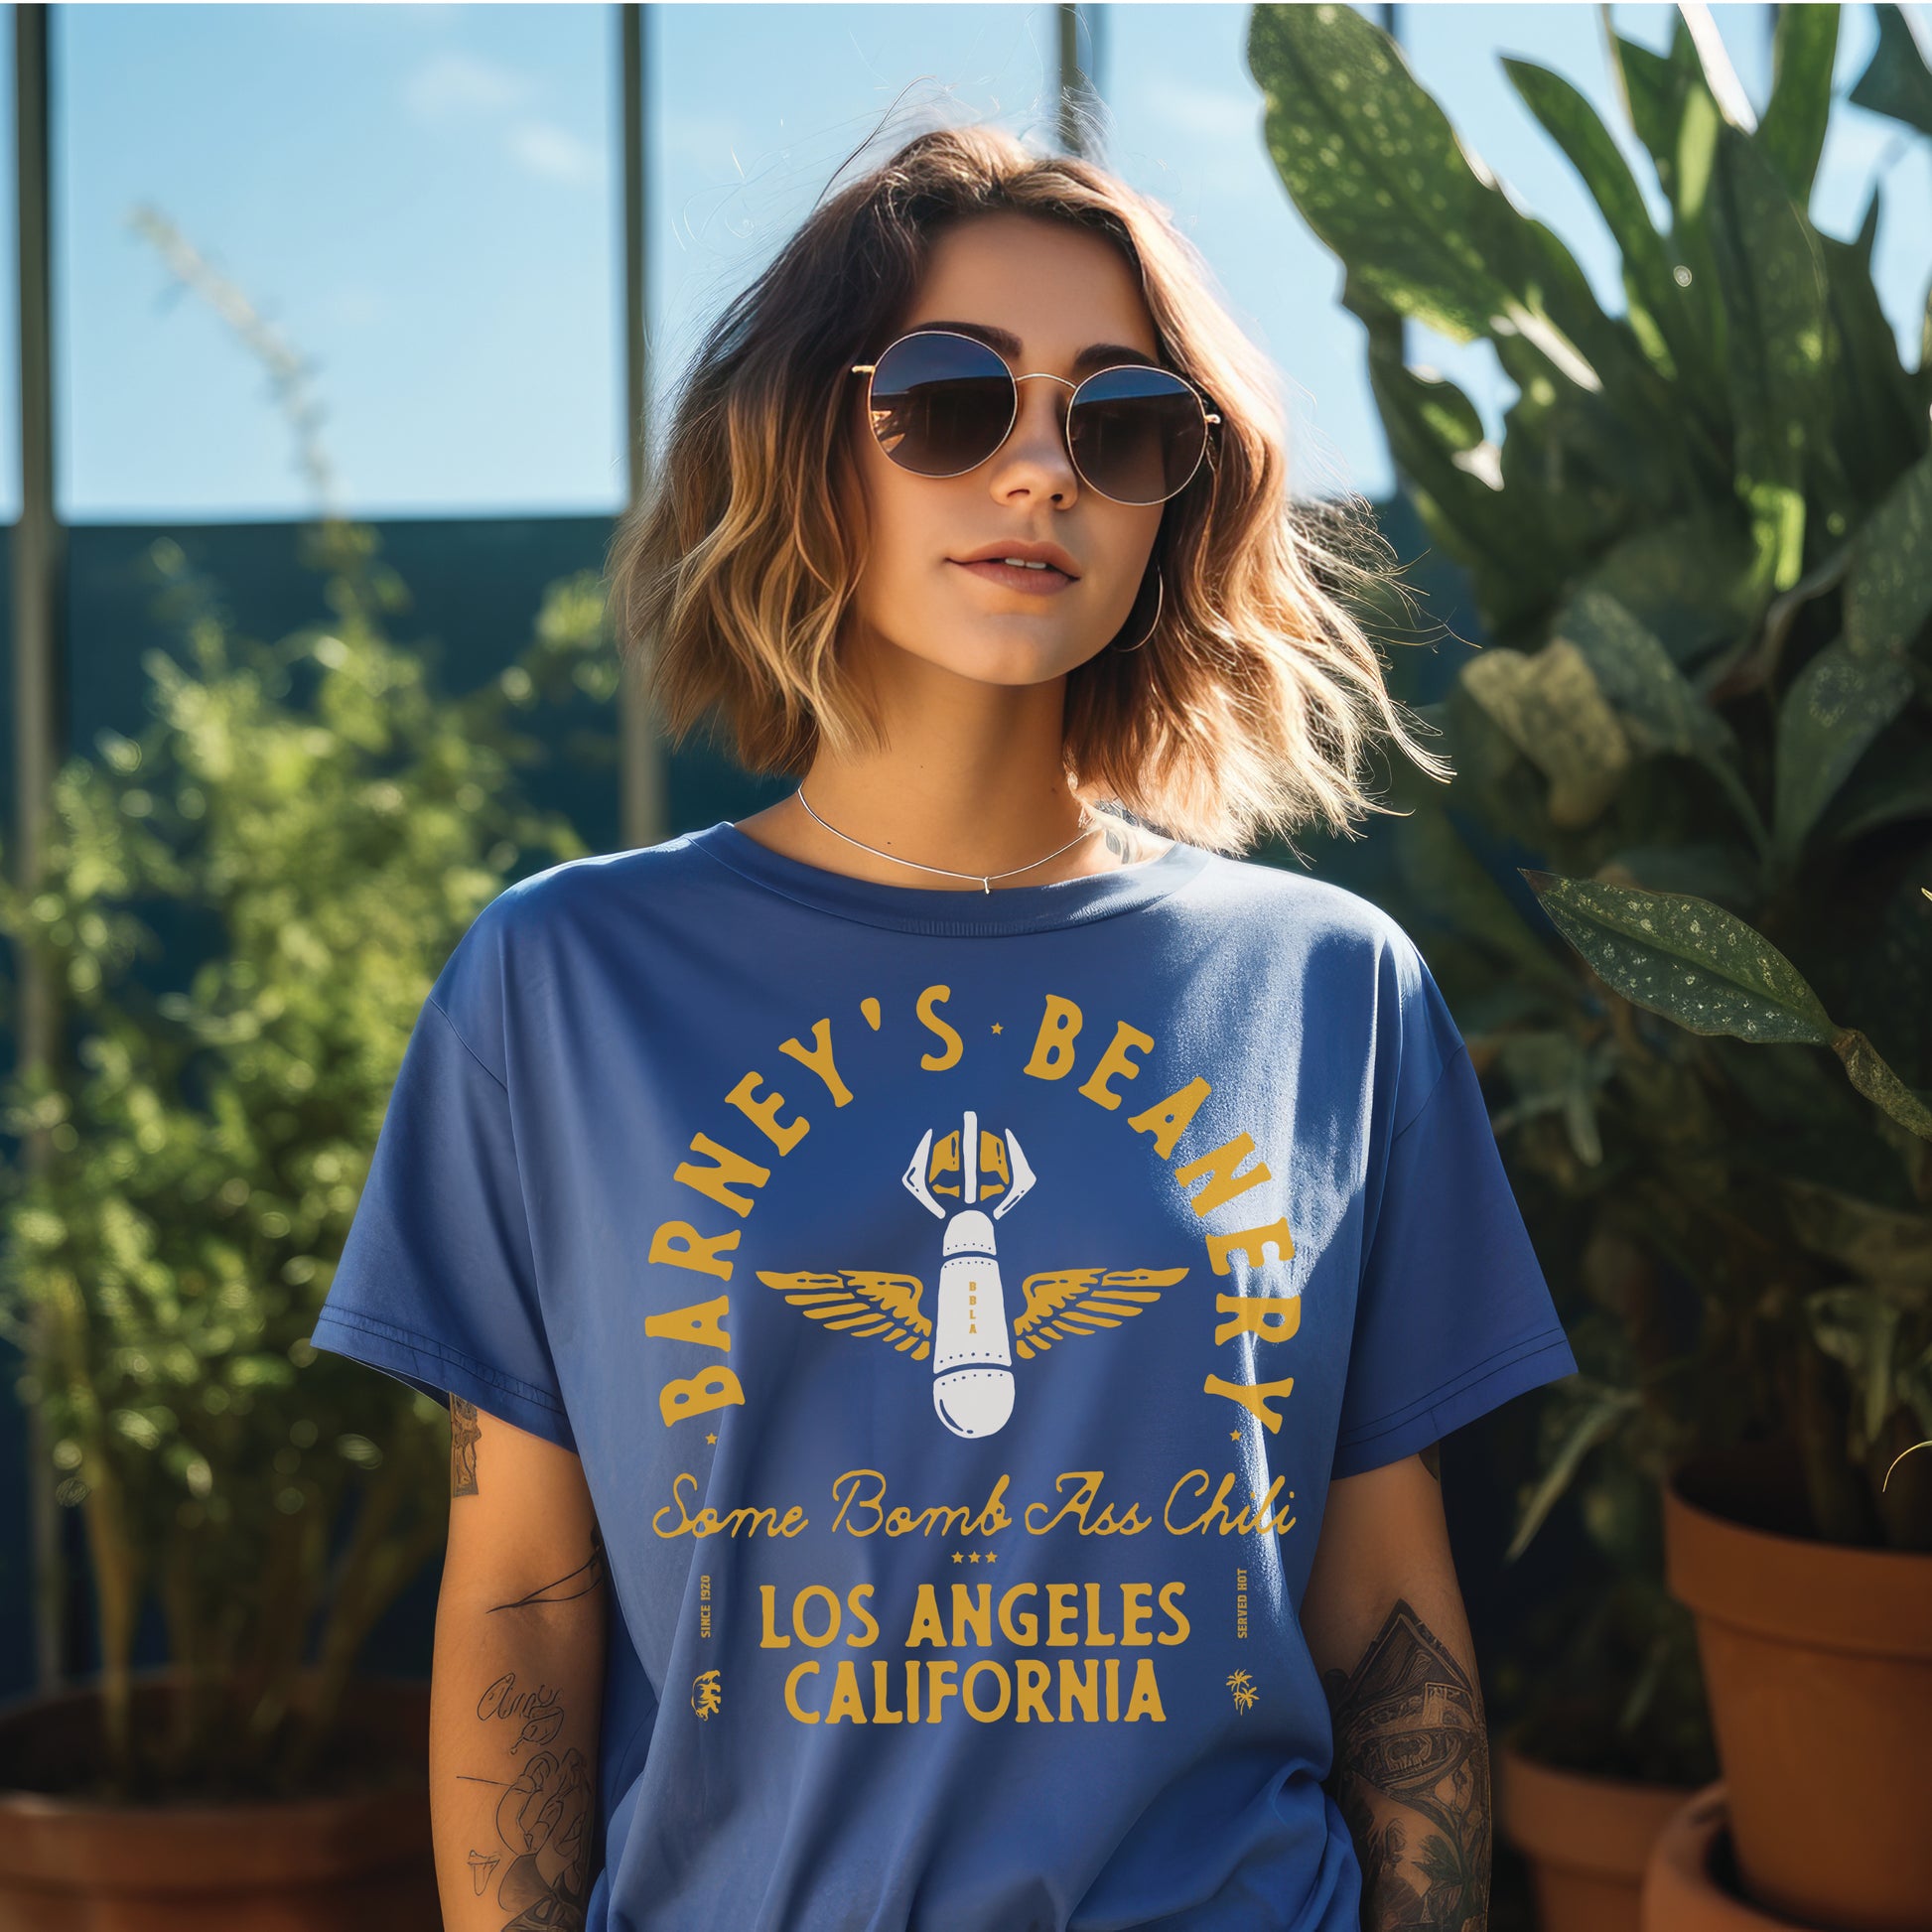 Some Bomb Ass Chili | BARNEY'S BEANERY - Women's Graphic Tee | Royal Caribe Comfort Colors 1717 T-Shirt - Big Graphic On Front View Of Female Lifestyle Image